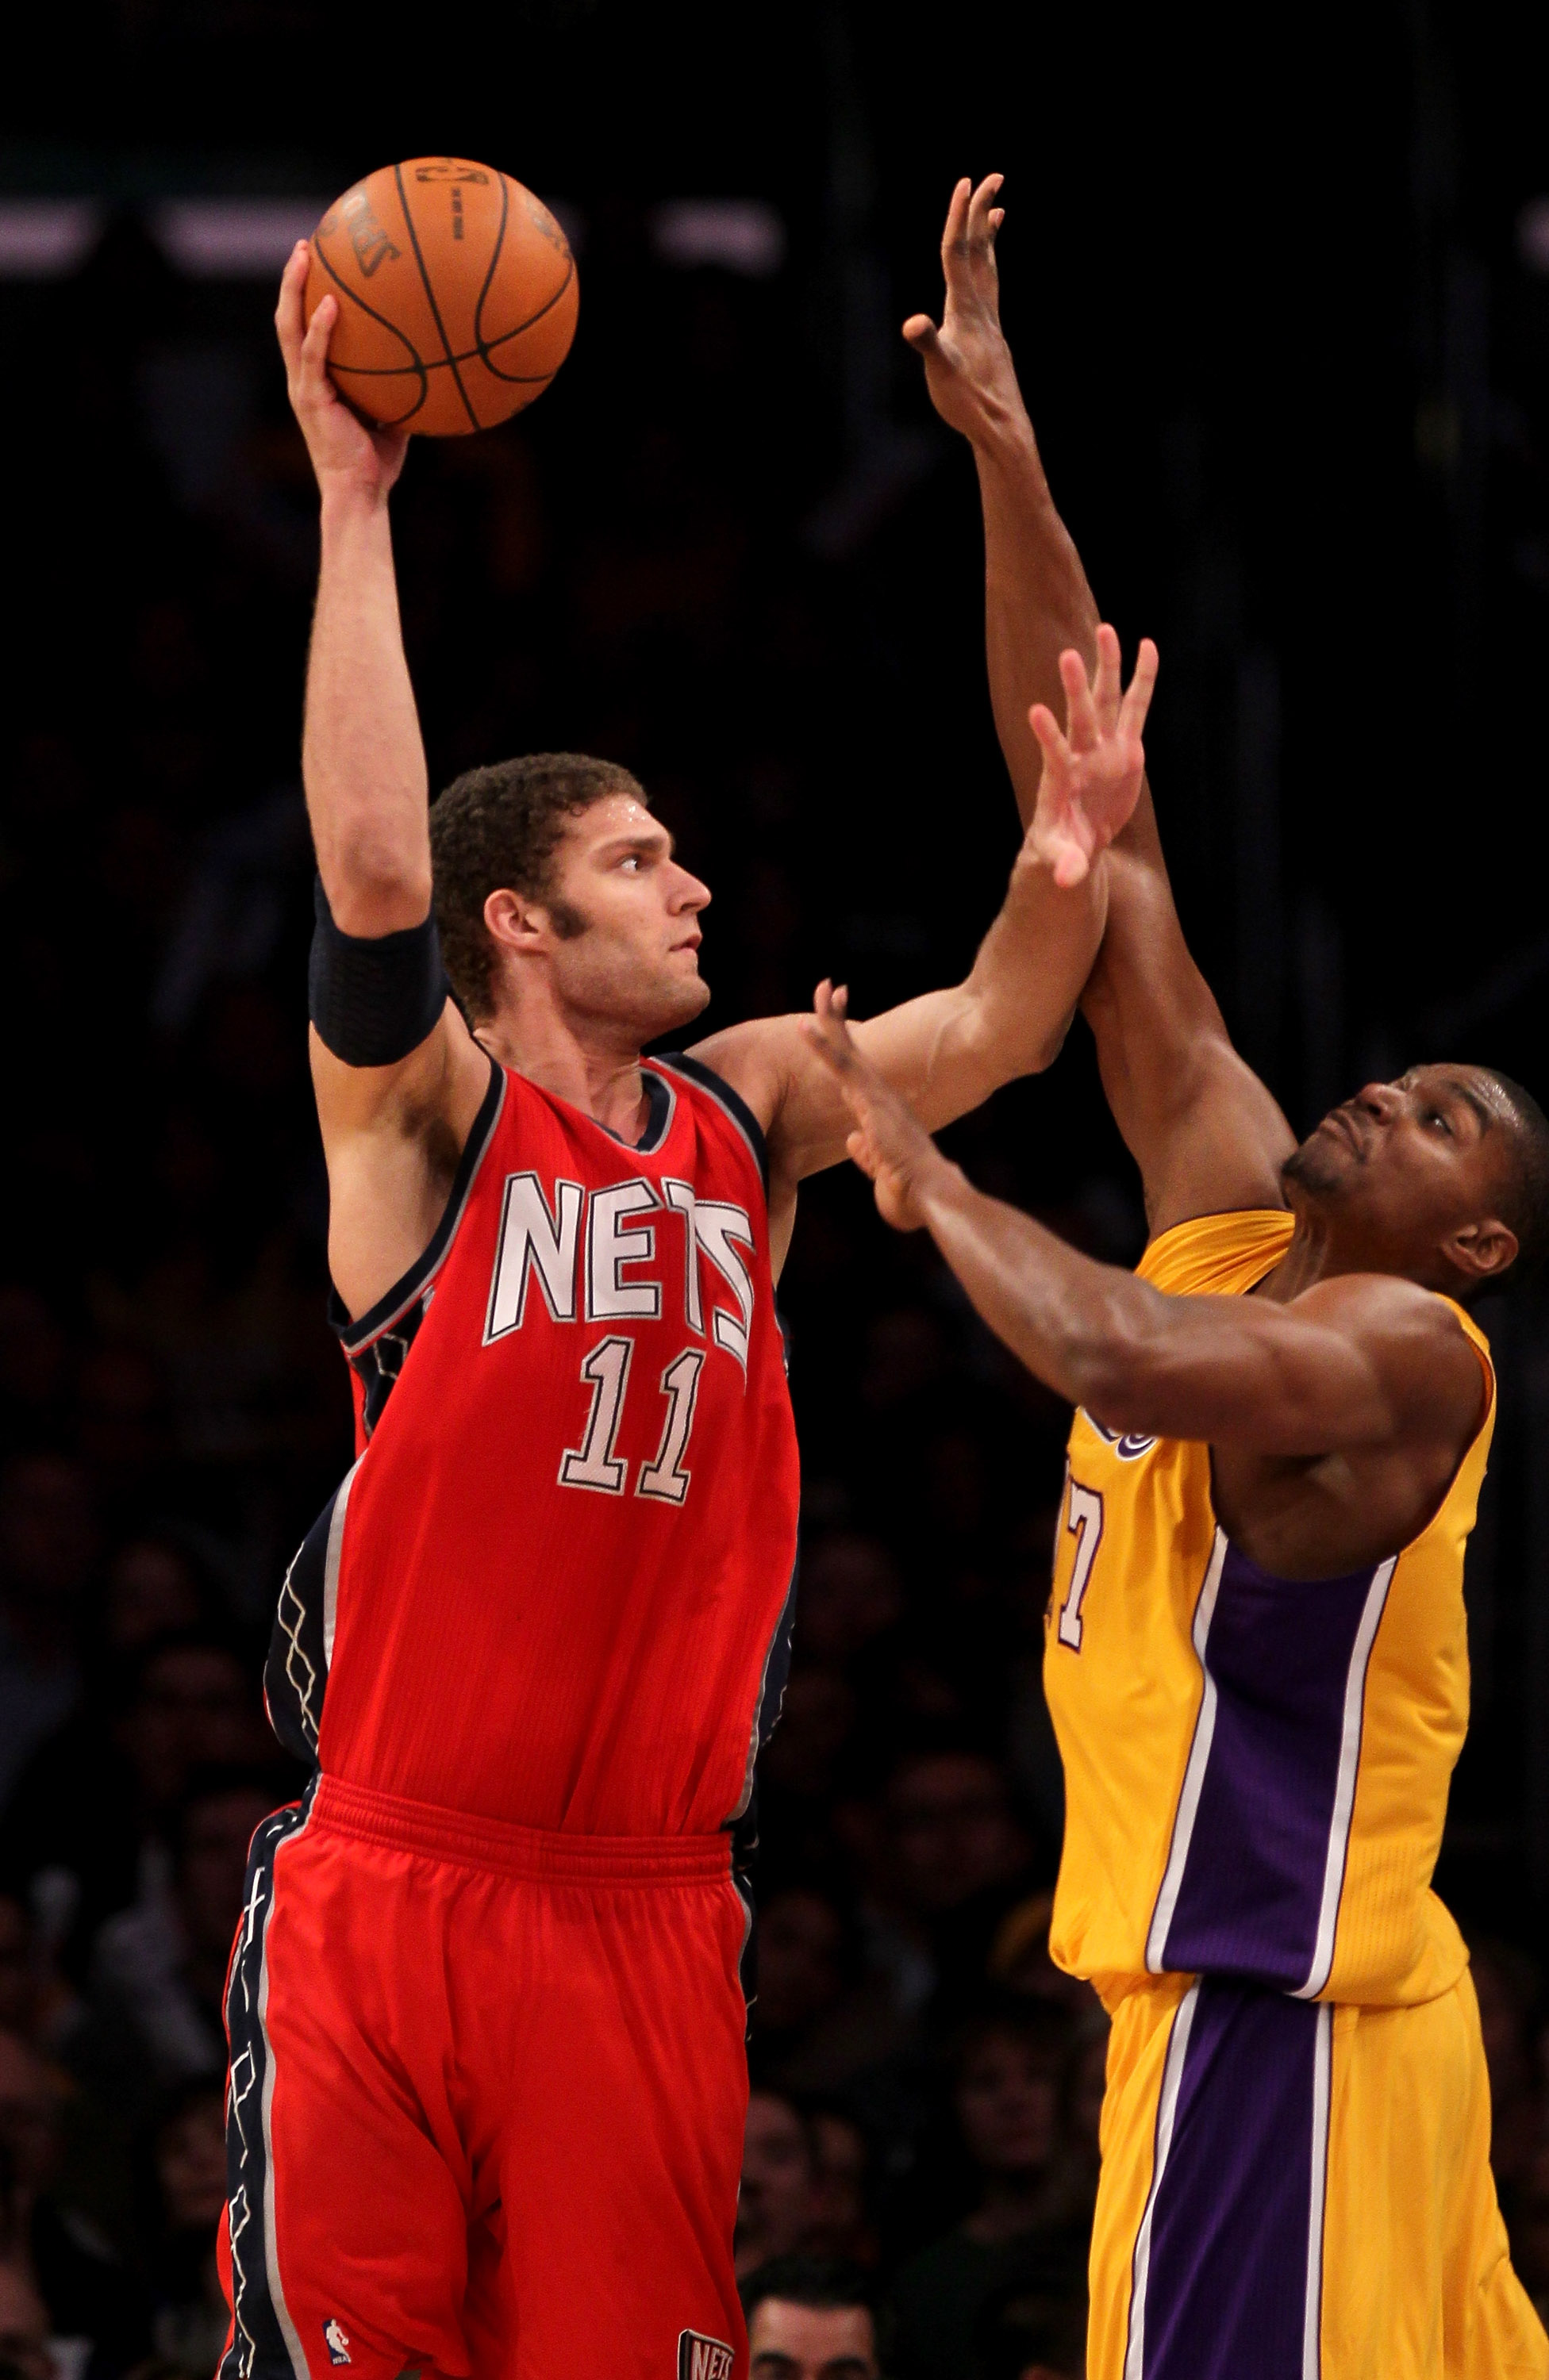 New Jersey Nets center Brook Lopez pleads his case with an